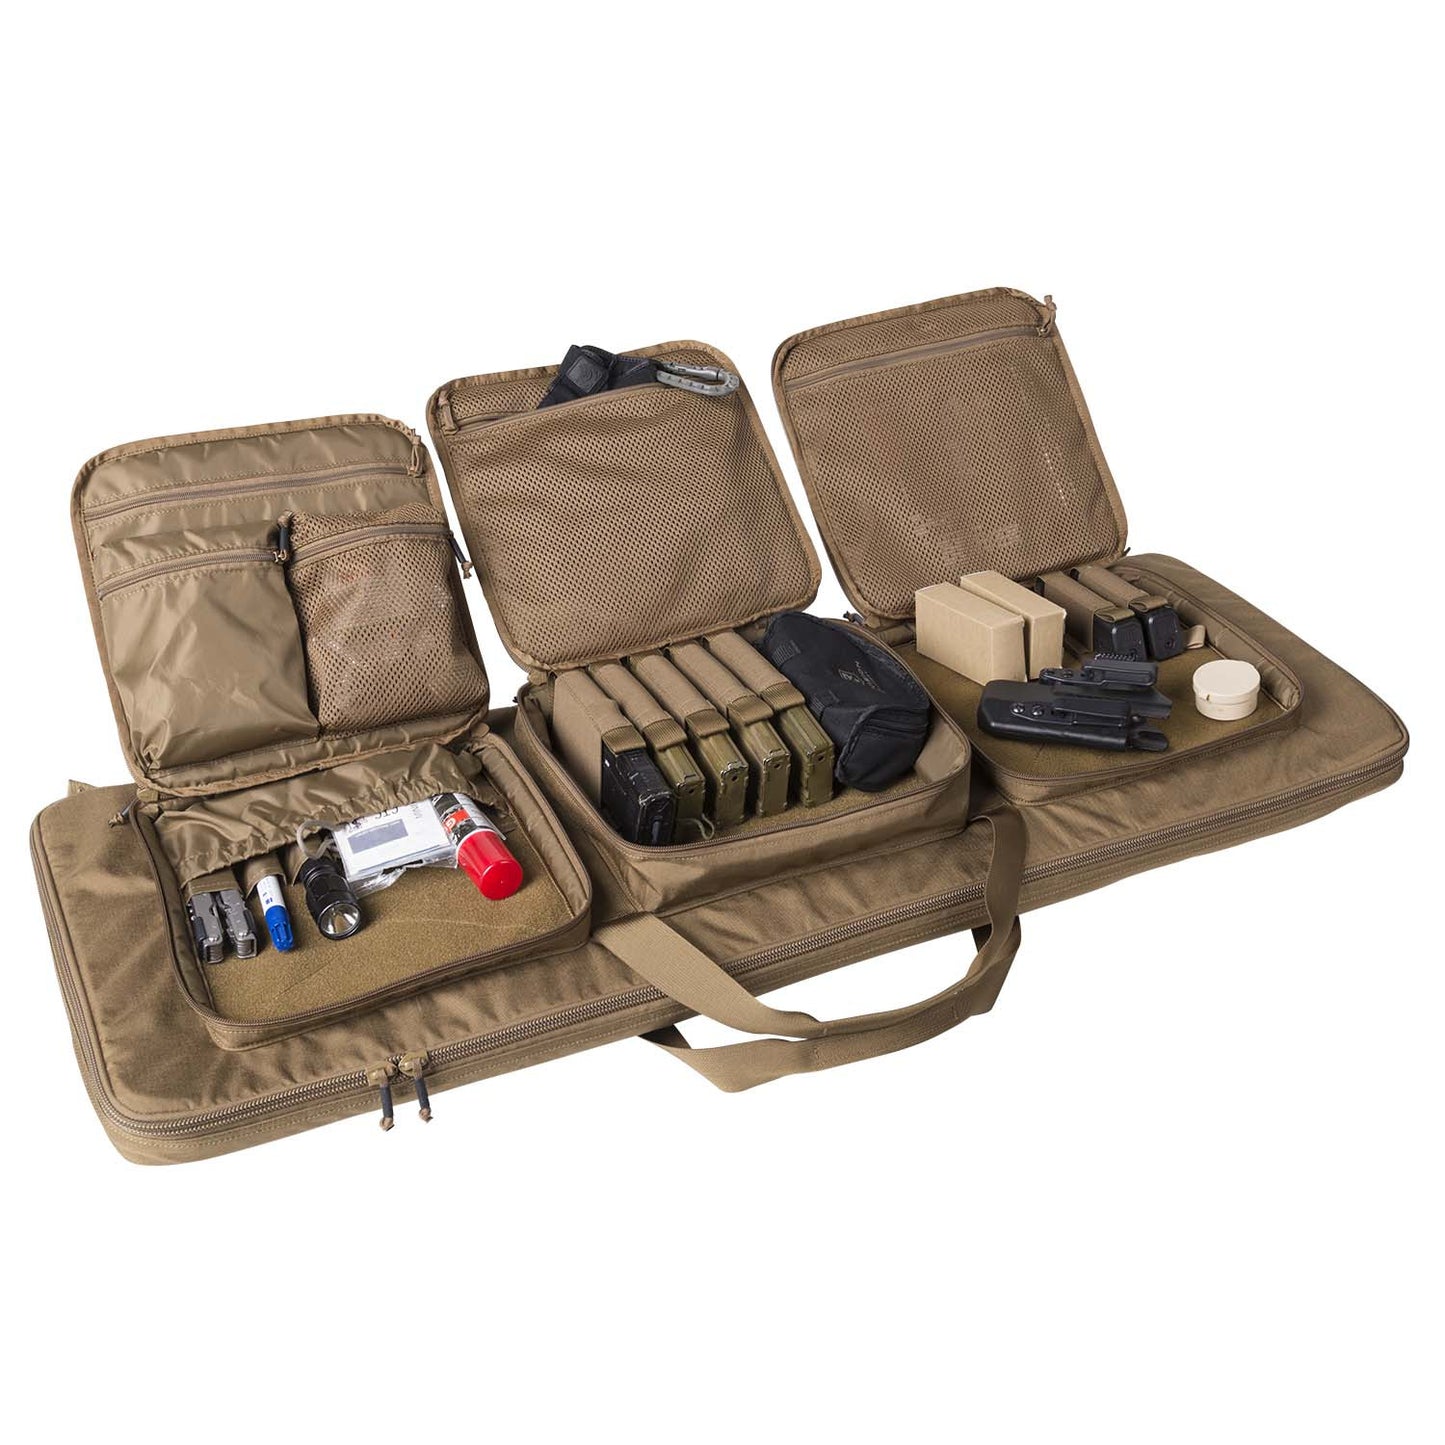 Double Upper Tactical Rifle Bag 18®